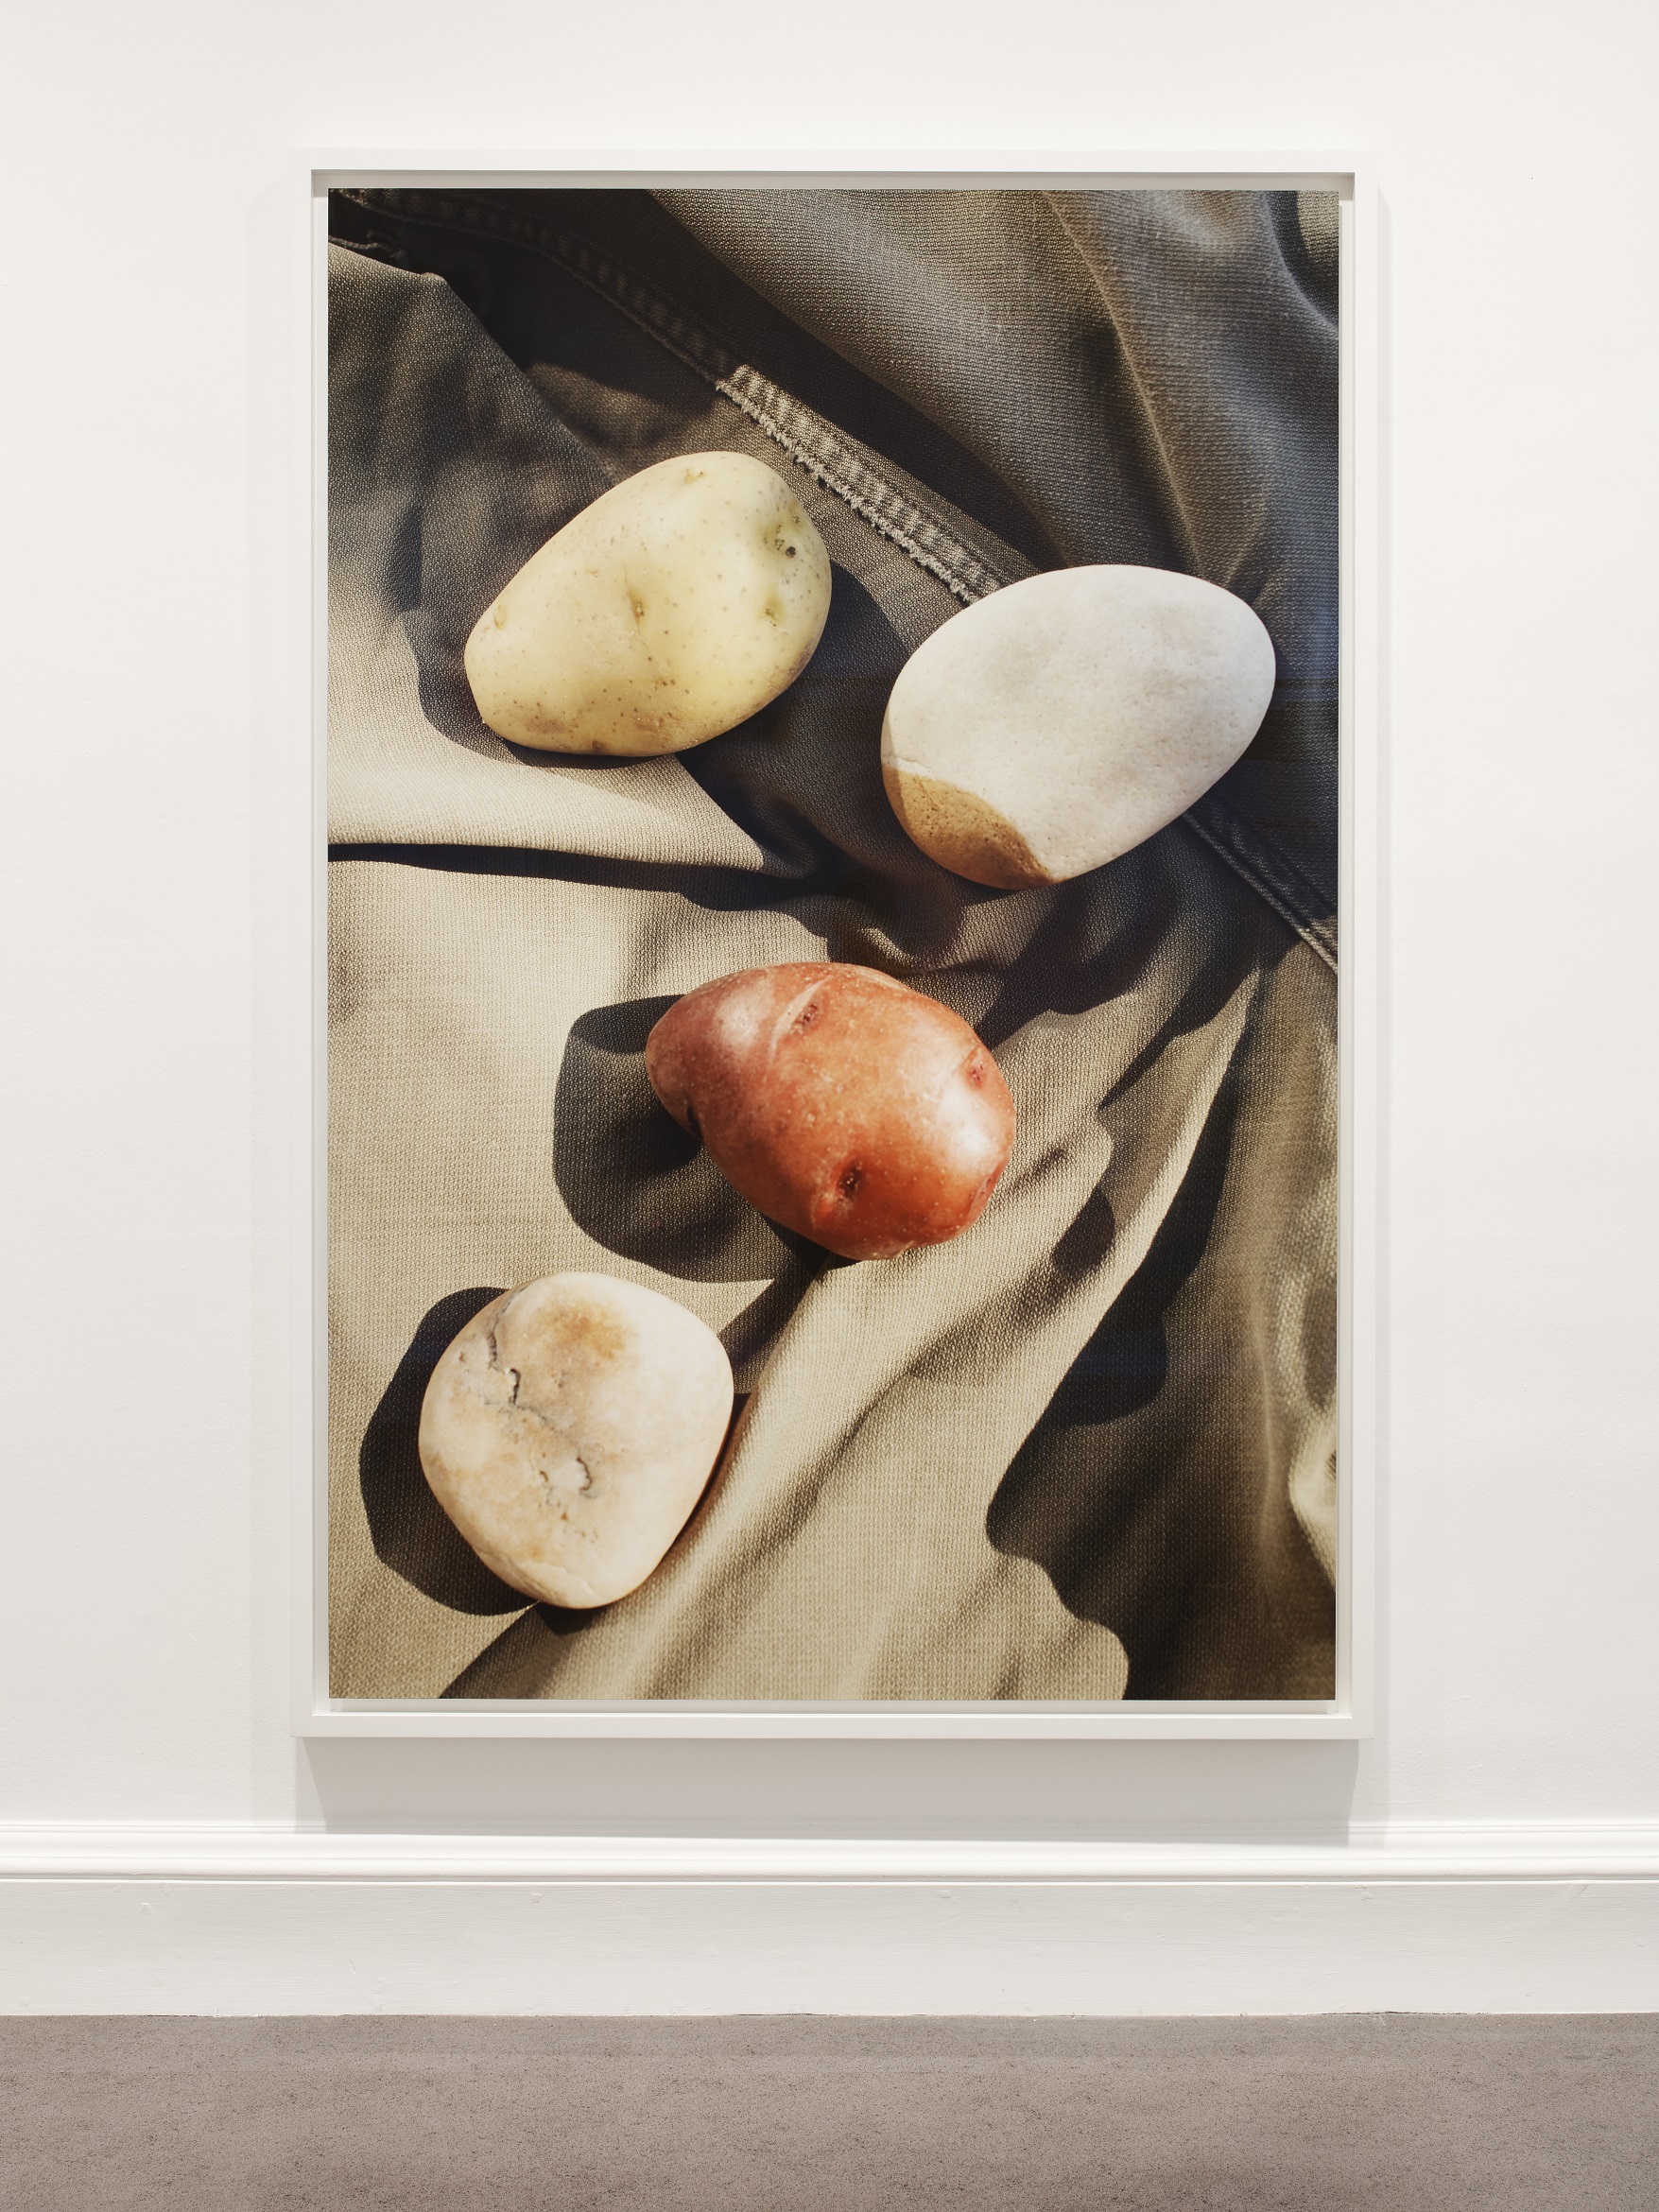 What is Wolfgang Tillmans' Still Life series all about? – Public 